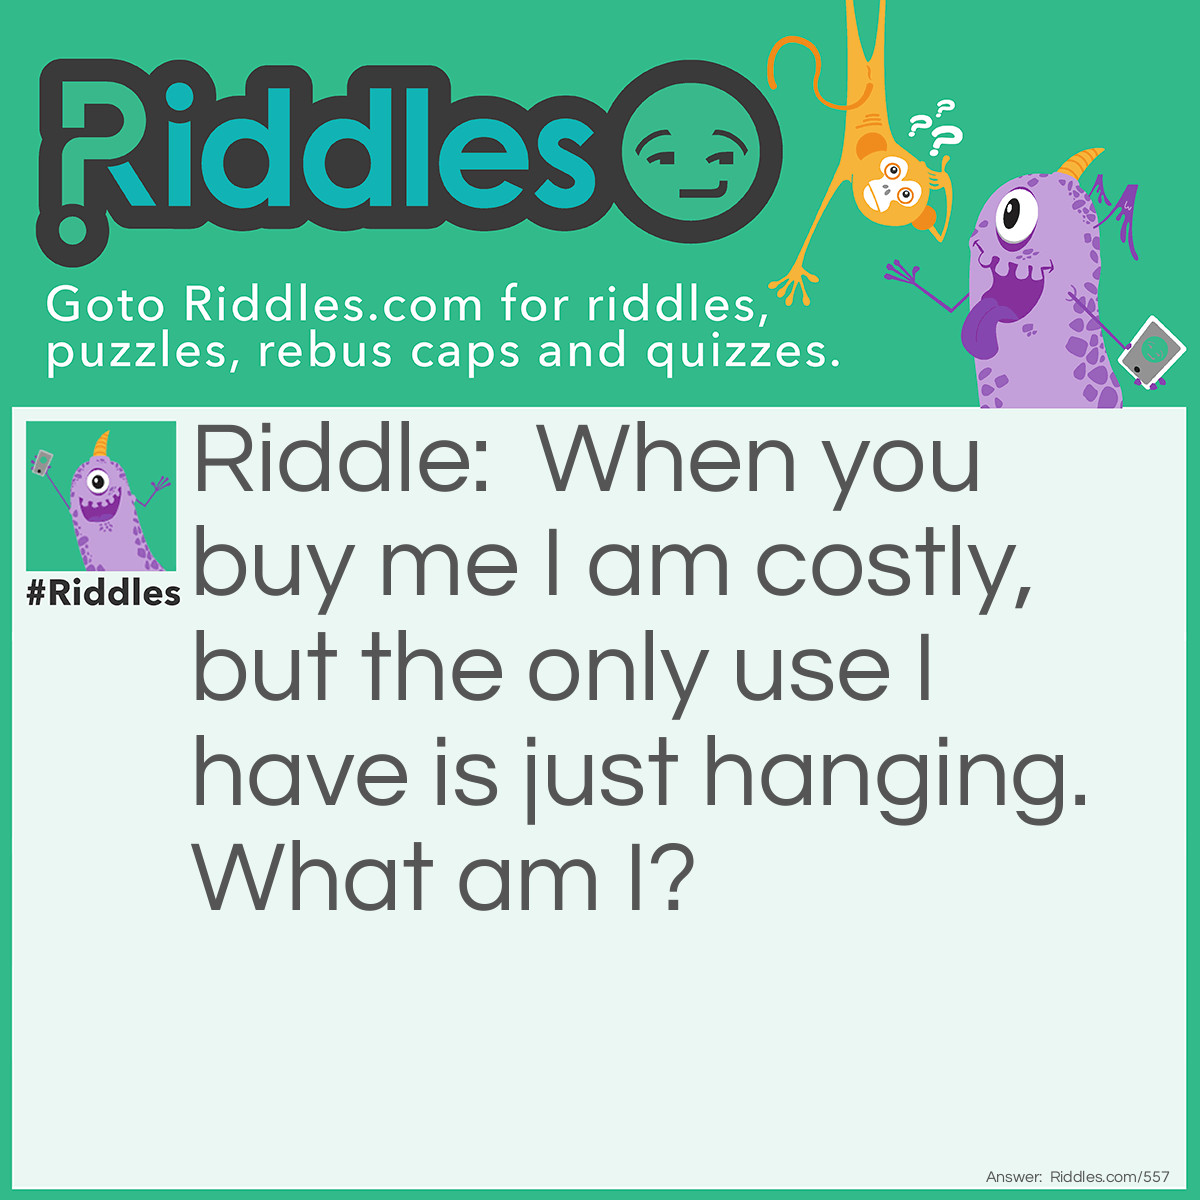 Riddle: When you buy me I am costly, but the only use I have is just hanging. 
What am I? Answer: Earrings.